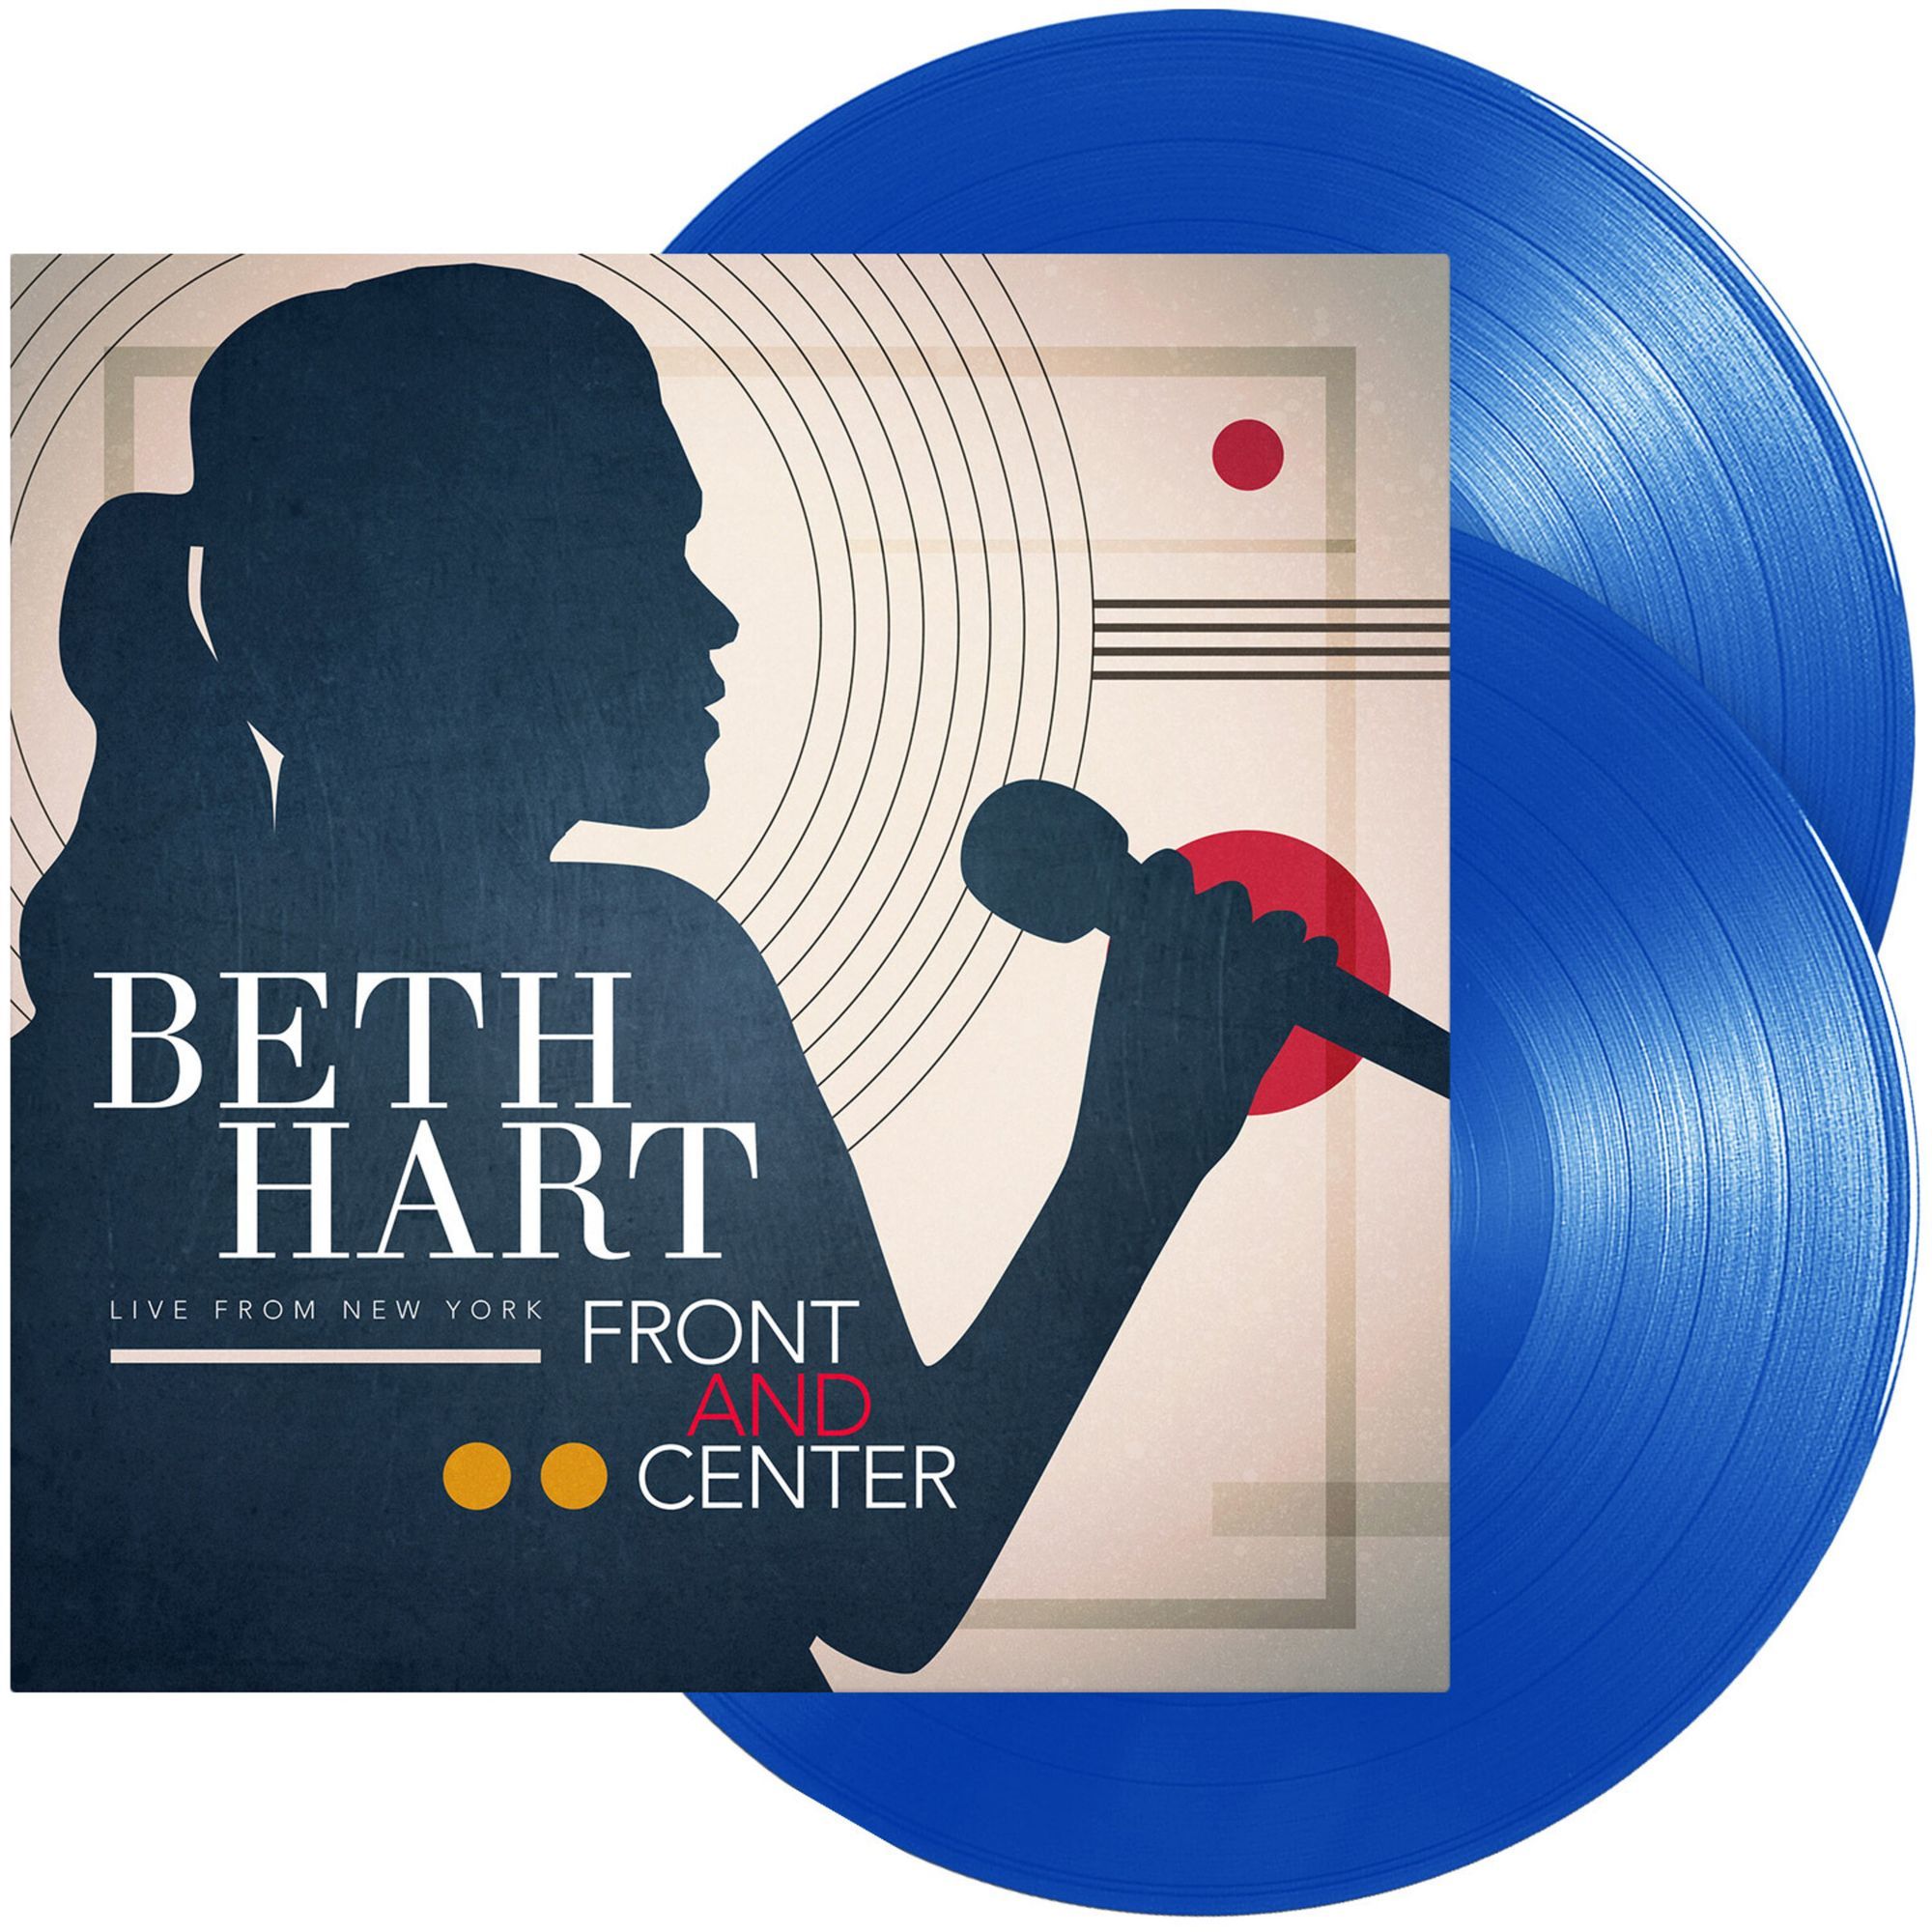 Виниловая пластинка Hart, Beth, Front And Center: Live From New York (coloured) (8712725746362) hart beth cd hart beth front and center live from new york